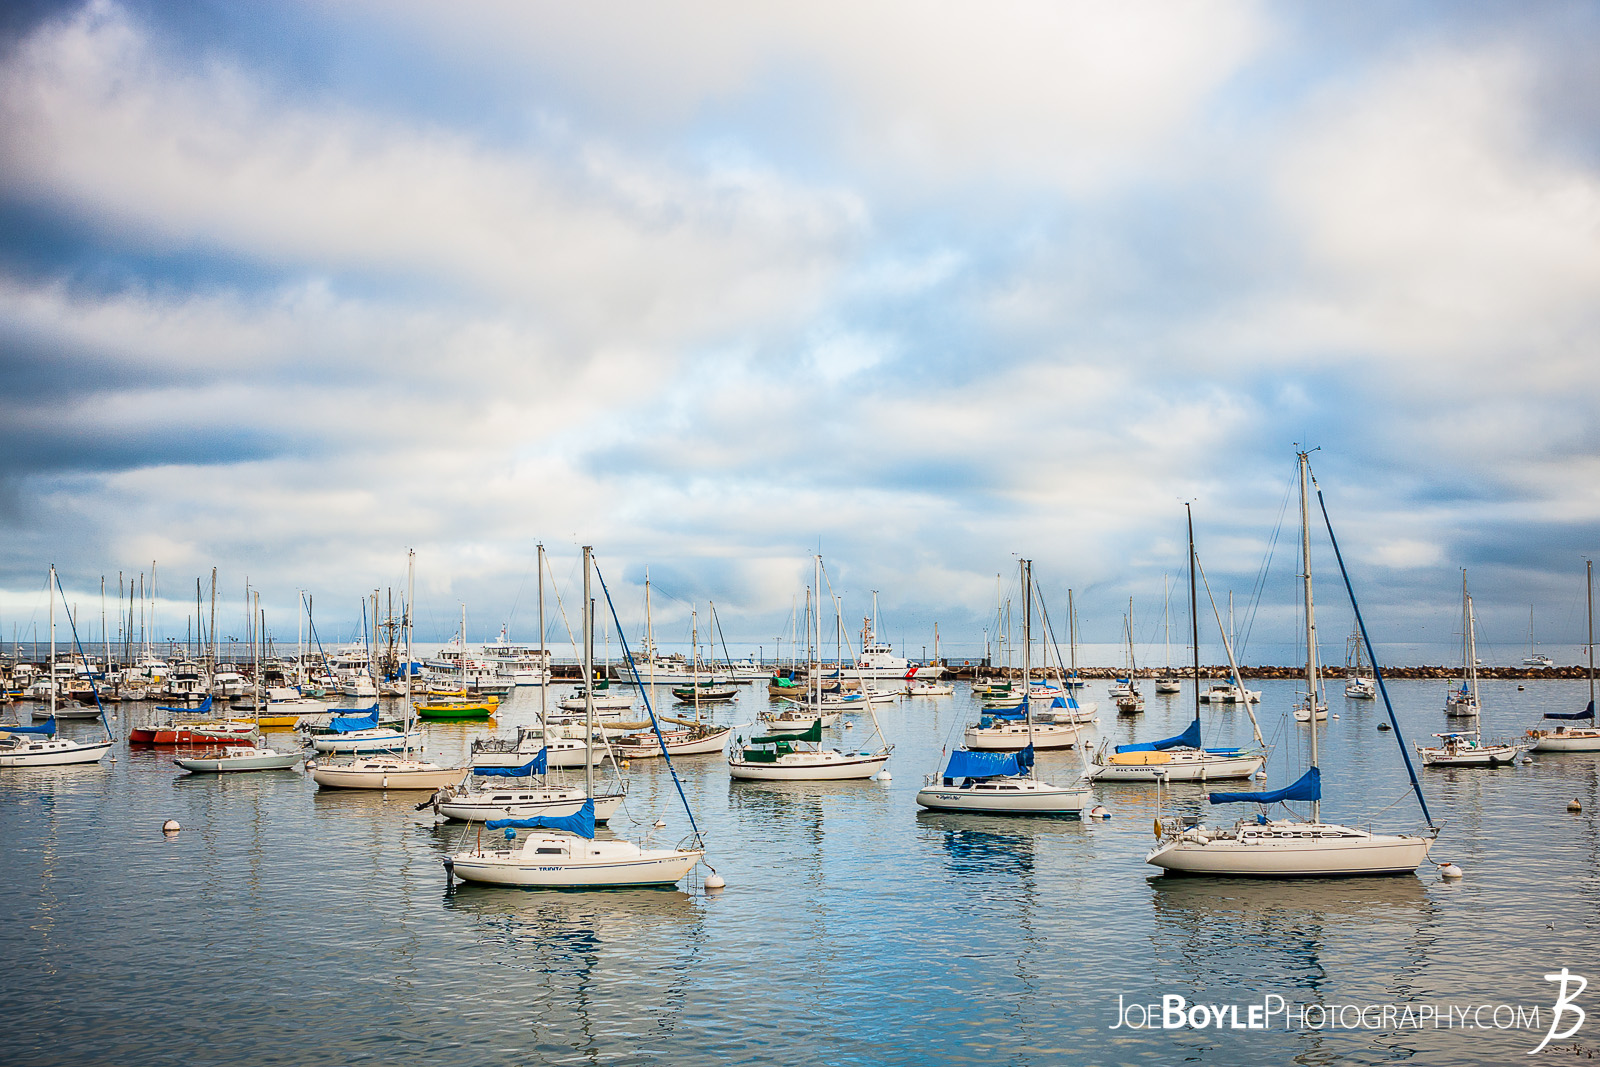  When I was traveling to Monterey, California I spent a lot of time just walking around the city, Pacific Grove and the sand dunes in the area. This is a shot of the bay and sailboats near Fisherman's Wharf and Cannery Row in Monterey! 